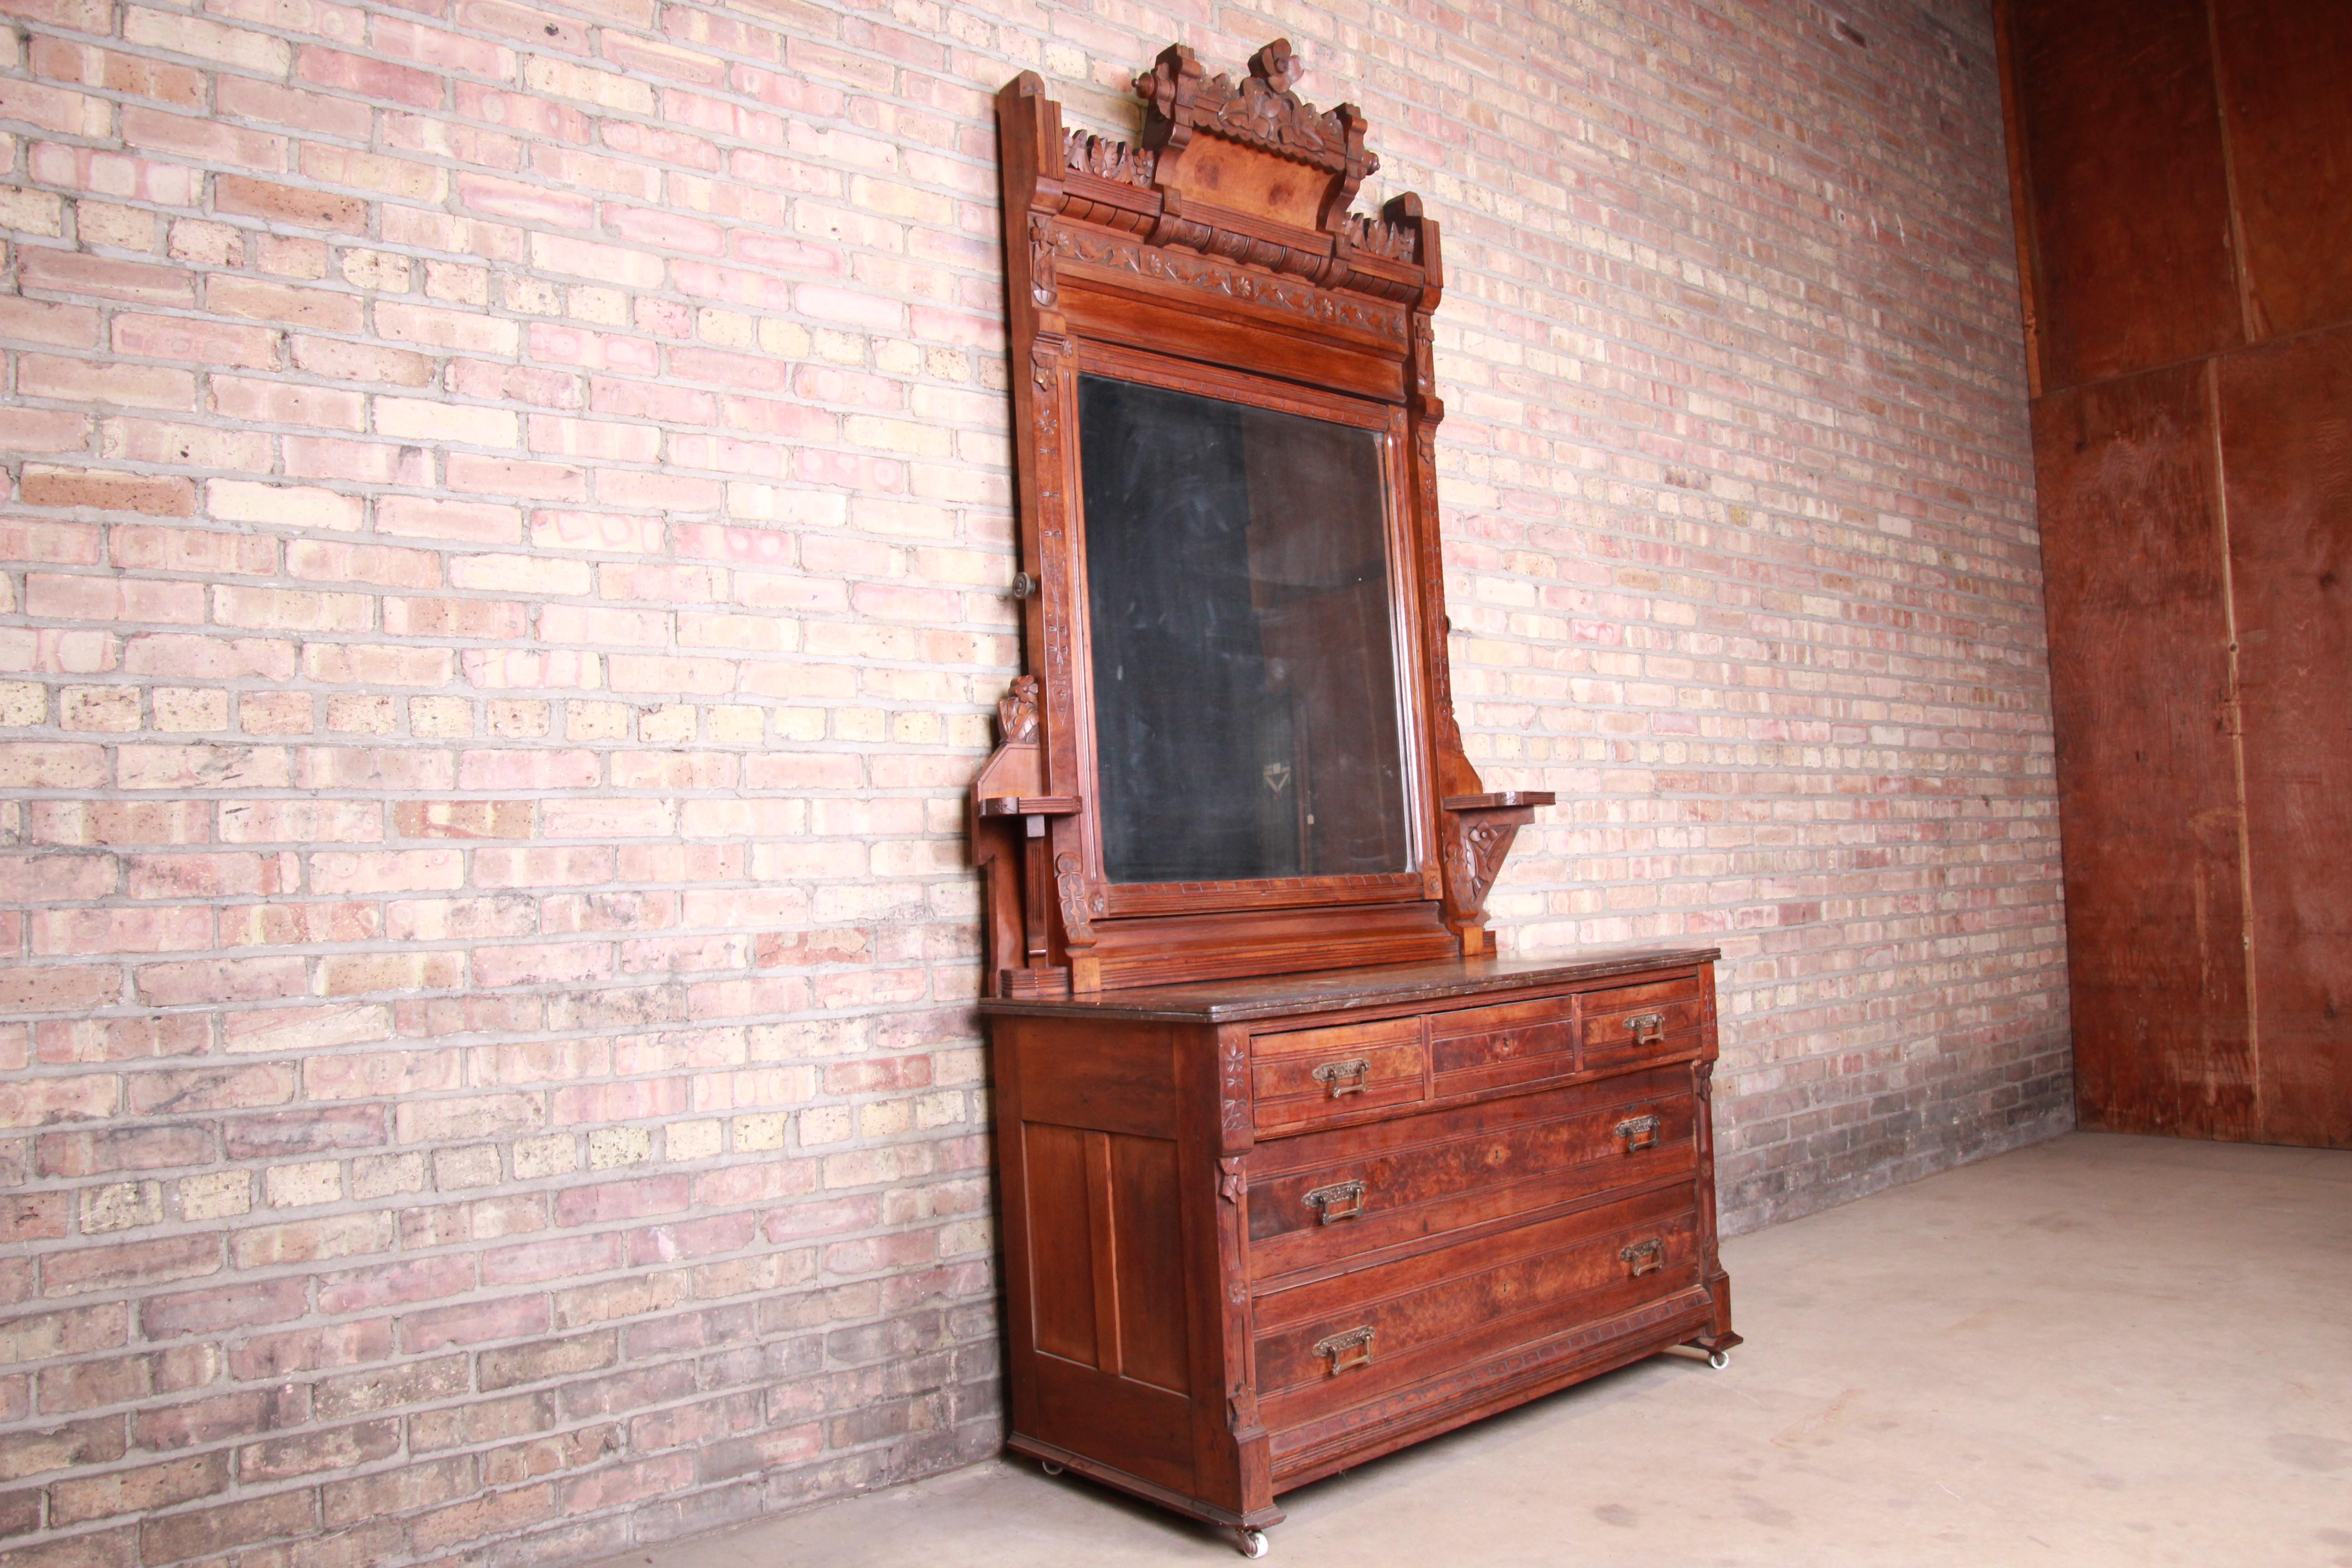 A rare and outstanding Victorian Eastlake five-drawer dresser with mirror

Originally purchased from Marshall Field's in Chicago, circa 1870

Ornate carved walnut and burl wood in floral motif, with original hardware, painted slate top, and